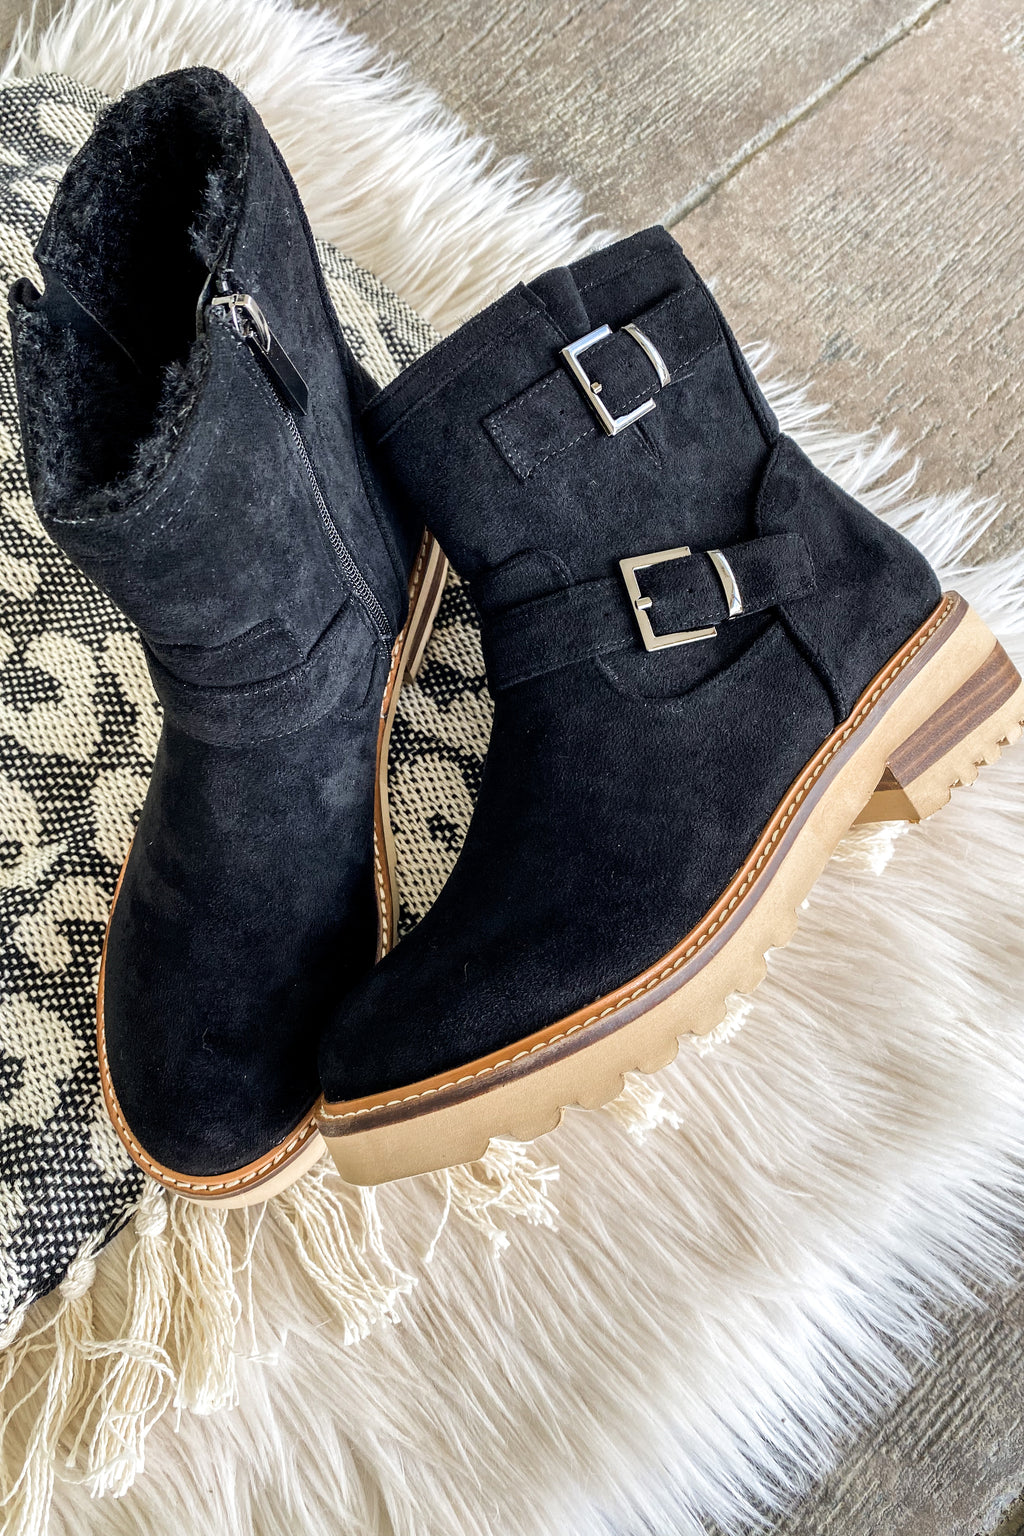 The Receipts Boot in Black